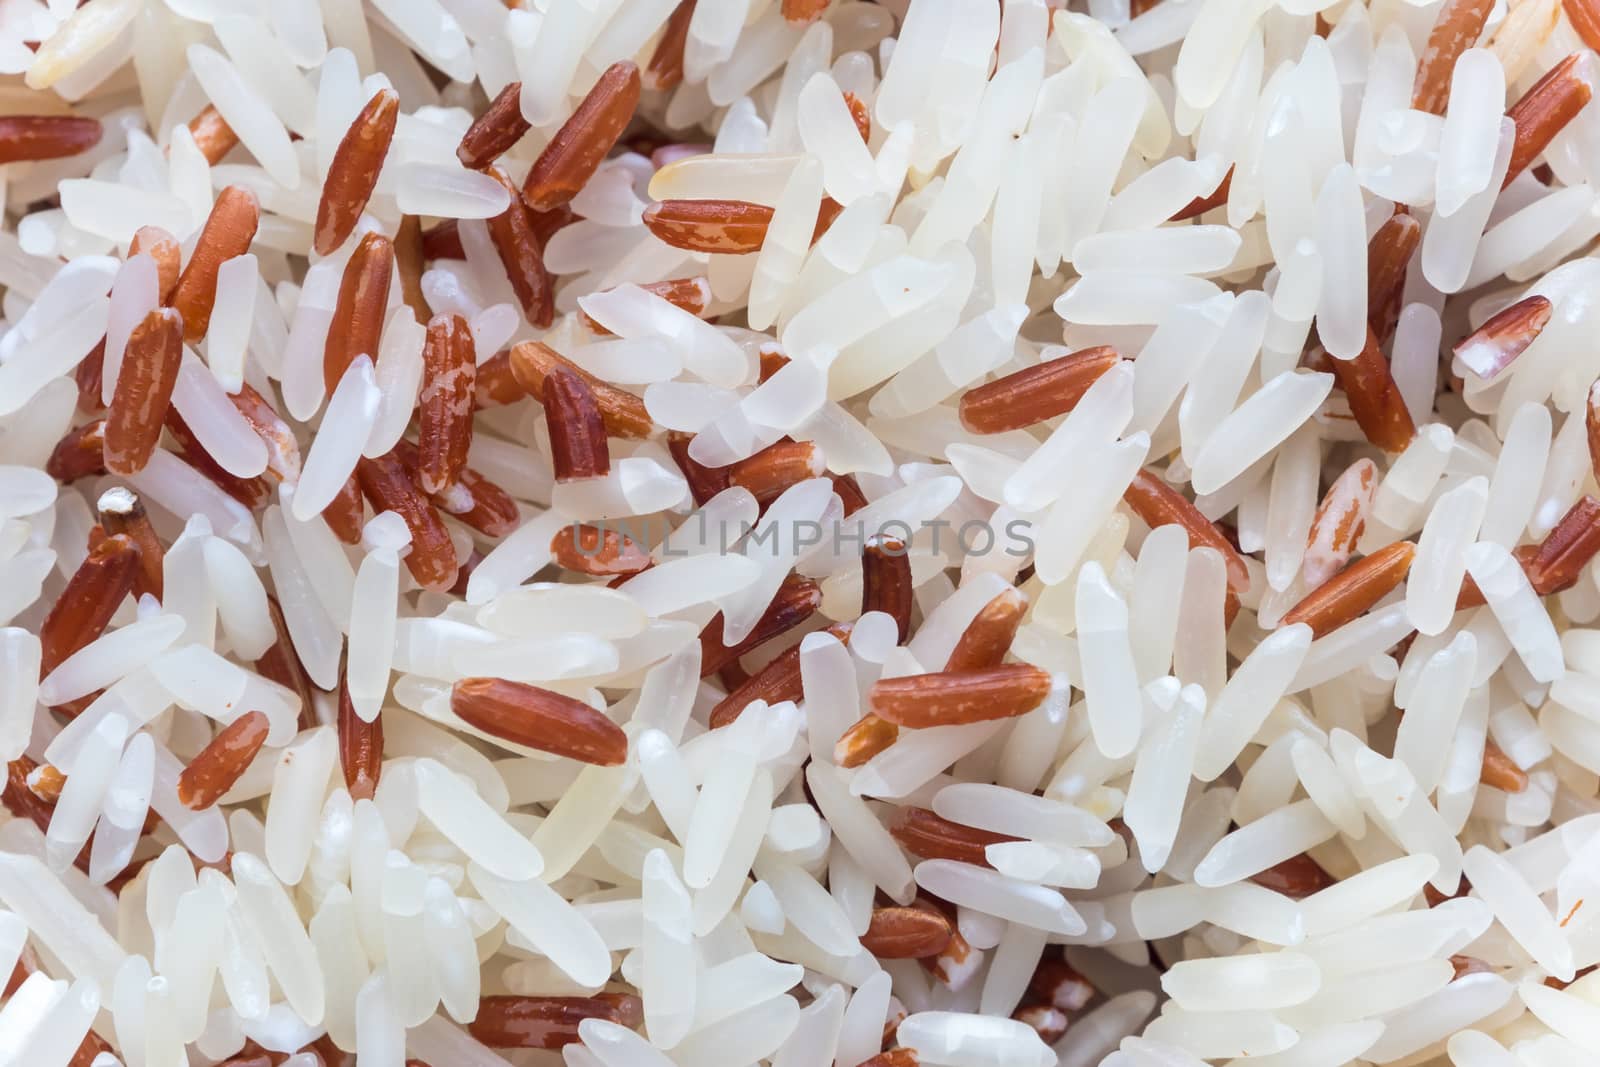 Mixed of white rice and brown rice by Satakorn